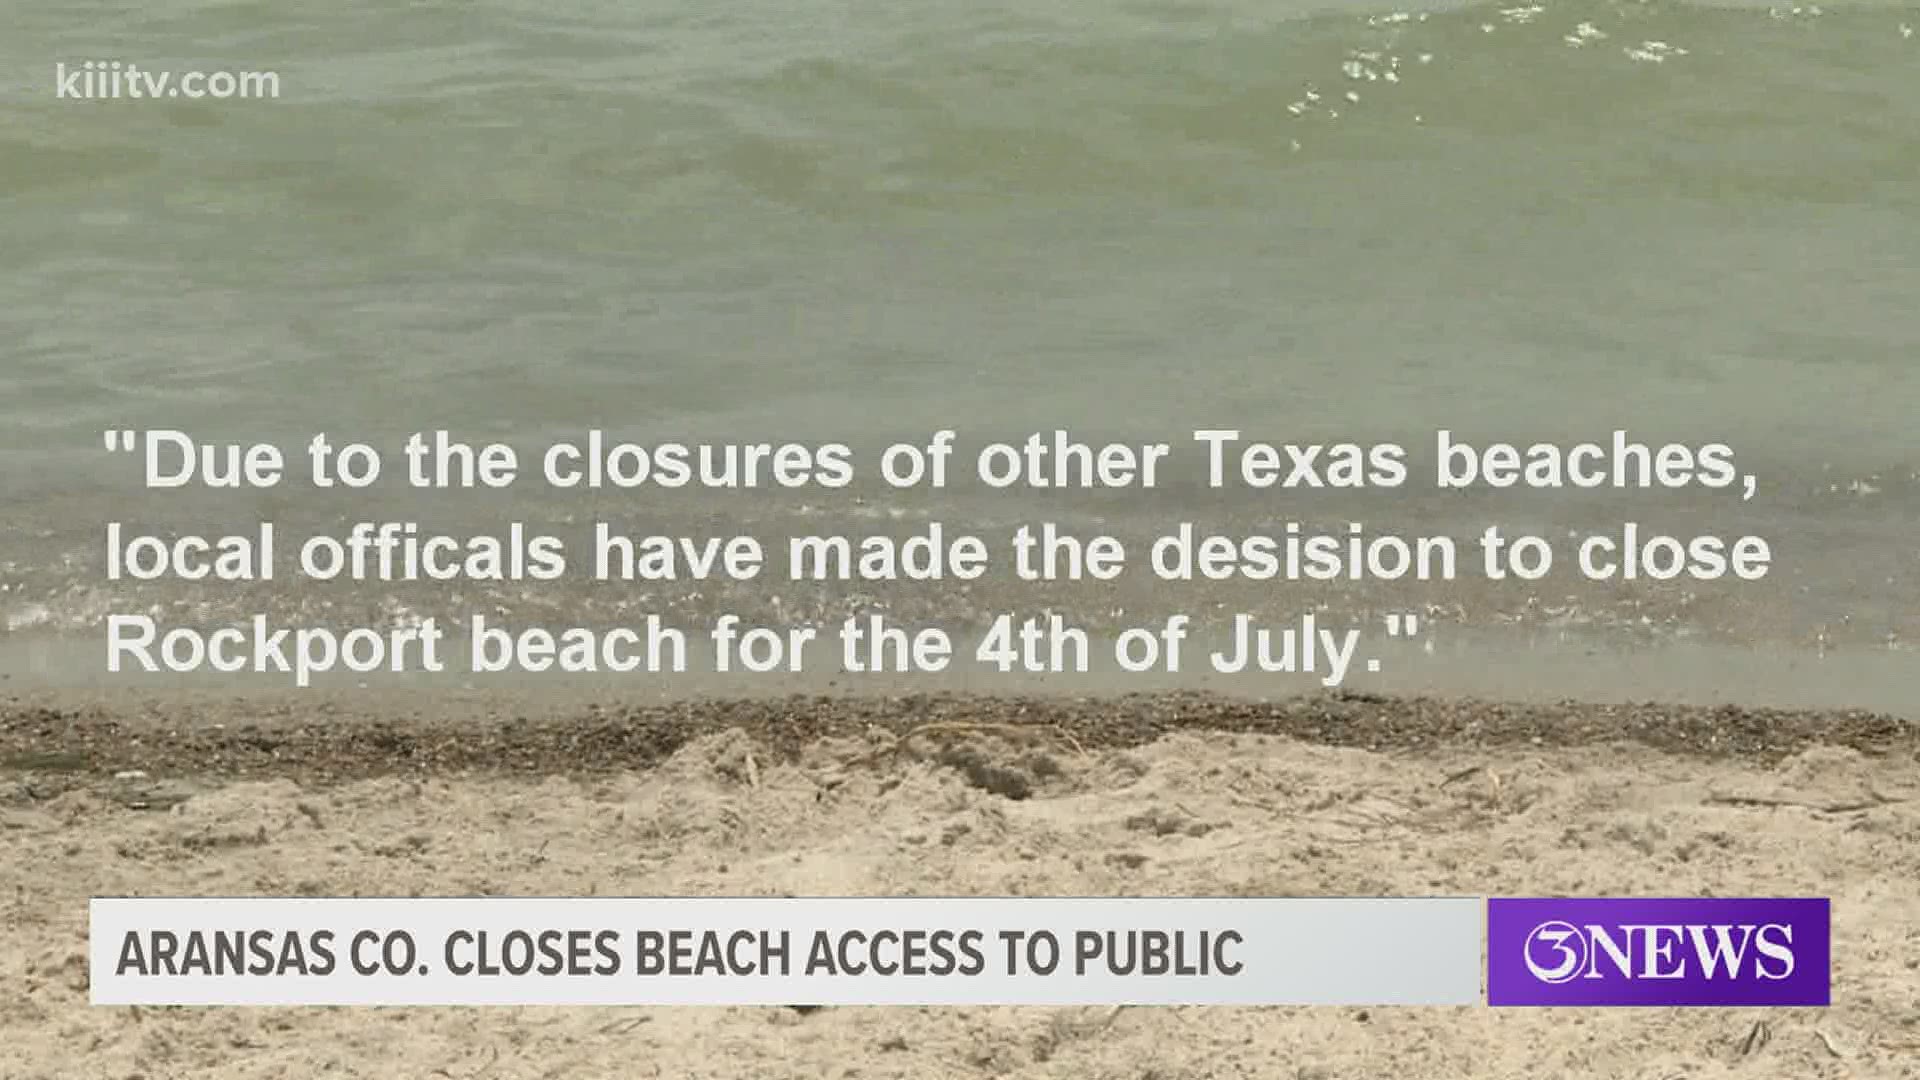 After a meeting with other community leaders and first responders, Aransas County Judge Burt Mills thought it would be best to close off beach access to the public.